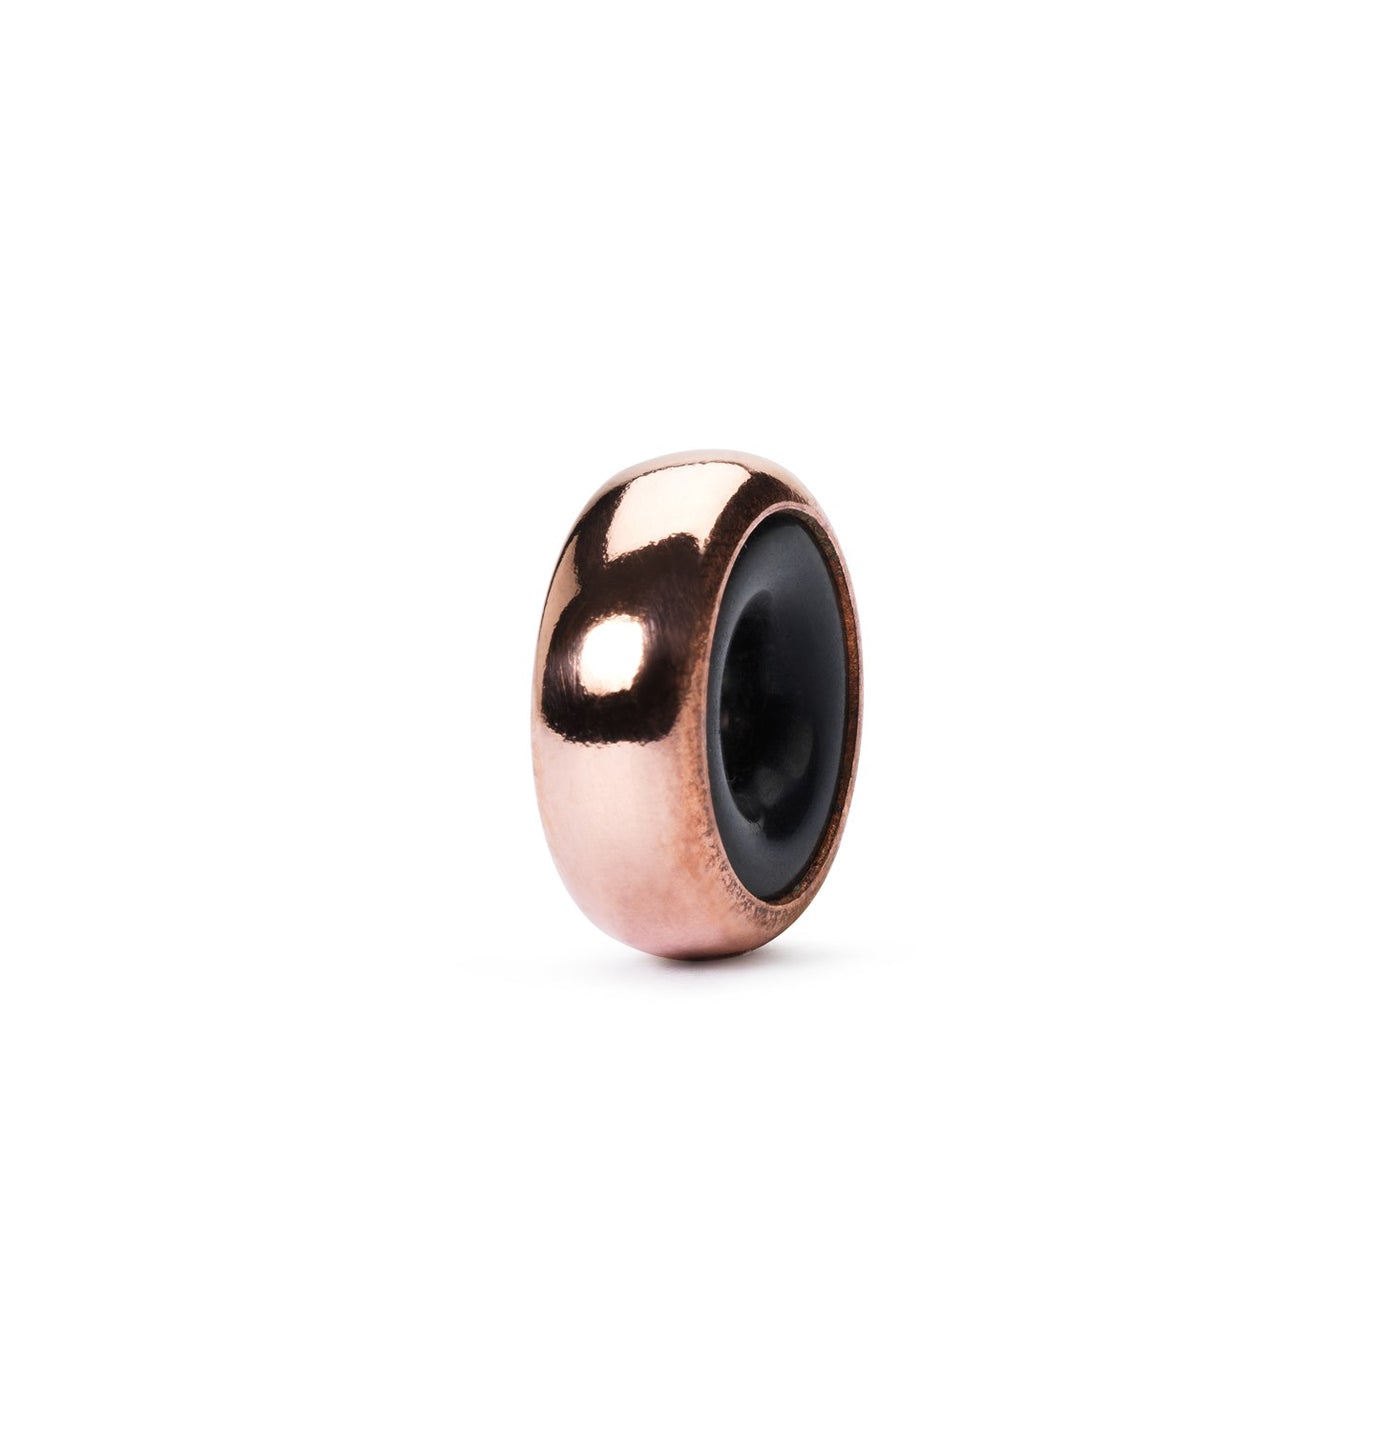 Simple spacer made of copper that contains rubber inside to prevent beads from rolling of your bracelet. Providing a warm and rustic touch to your Trollbeads jewelry.